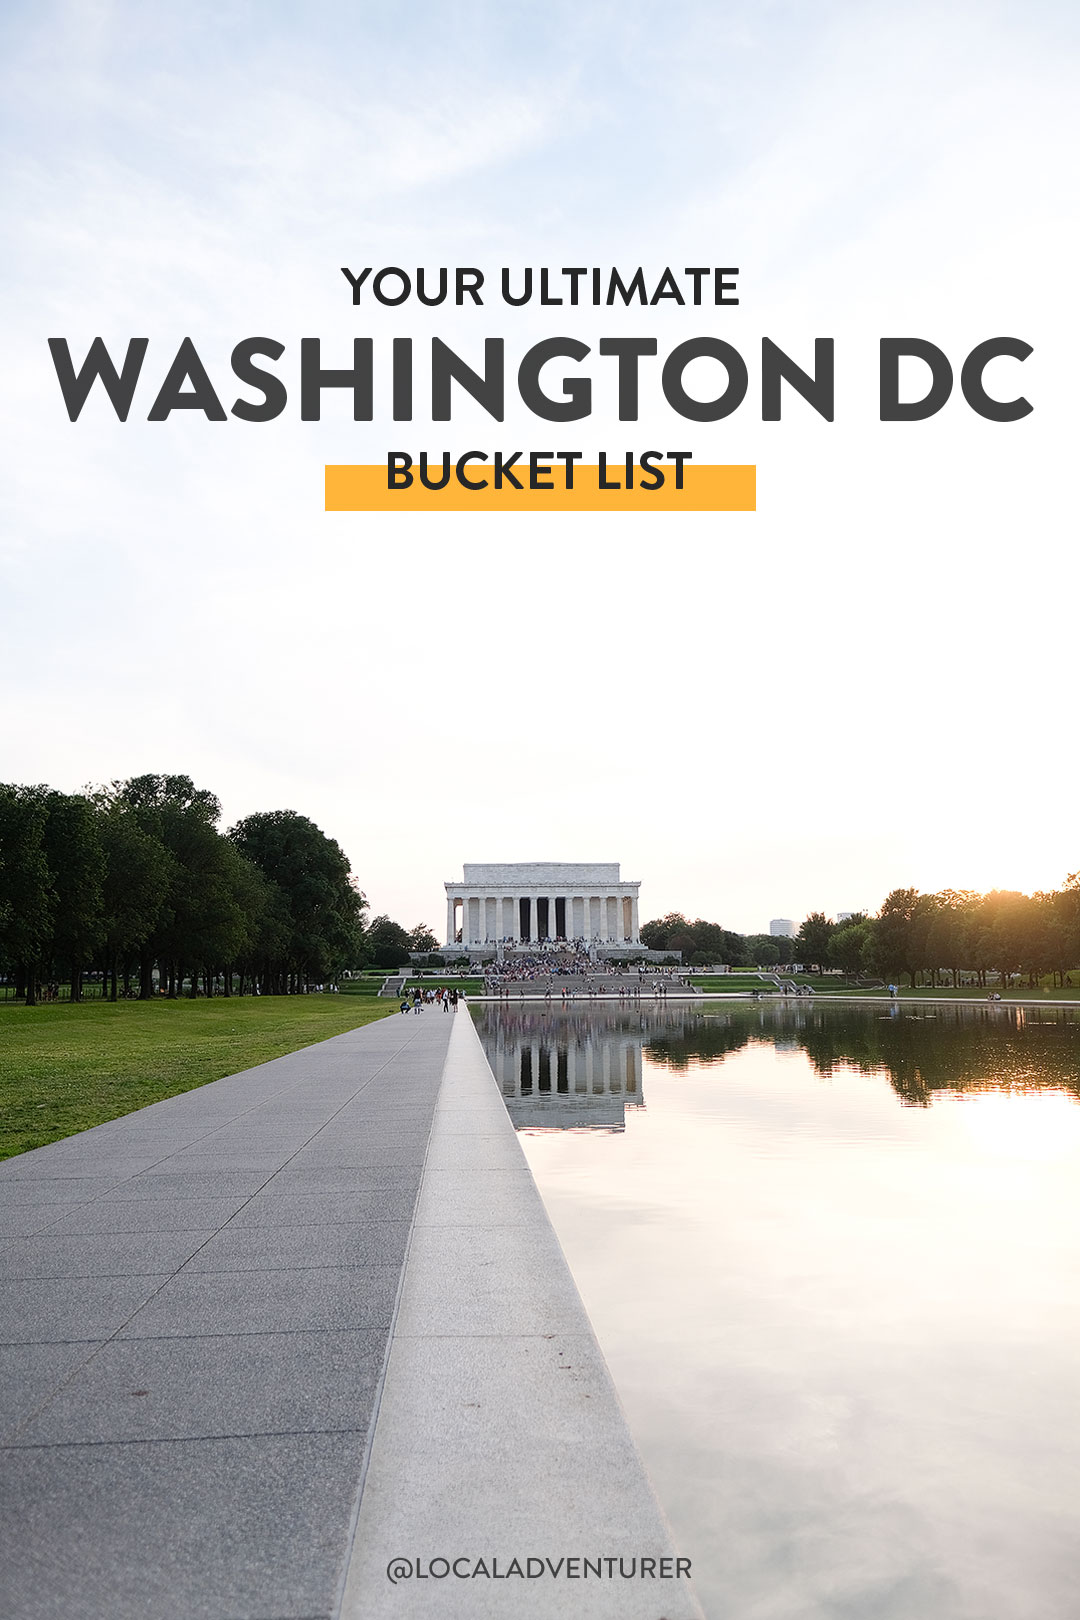 101 Things to Do in Washington DC - Your Ultimate Washington DC Bucket List